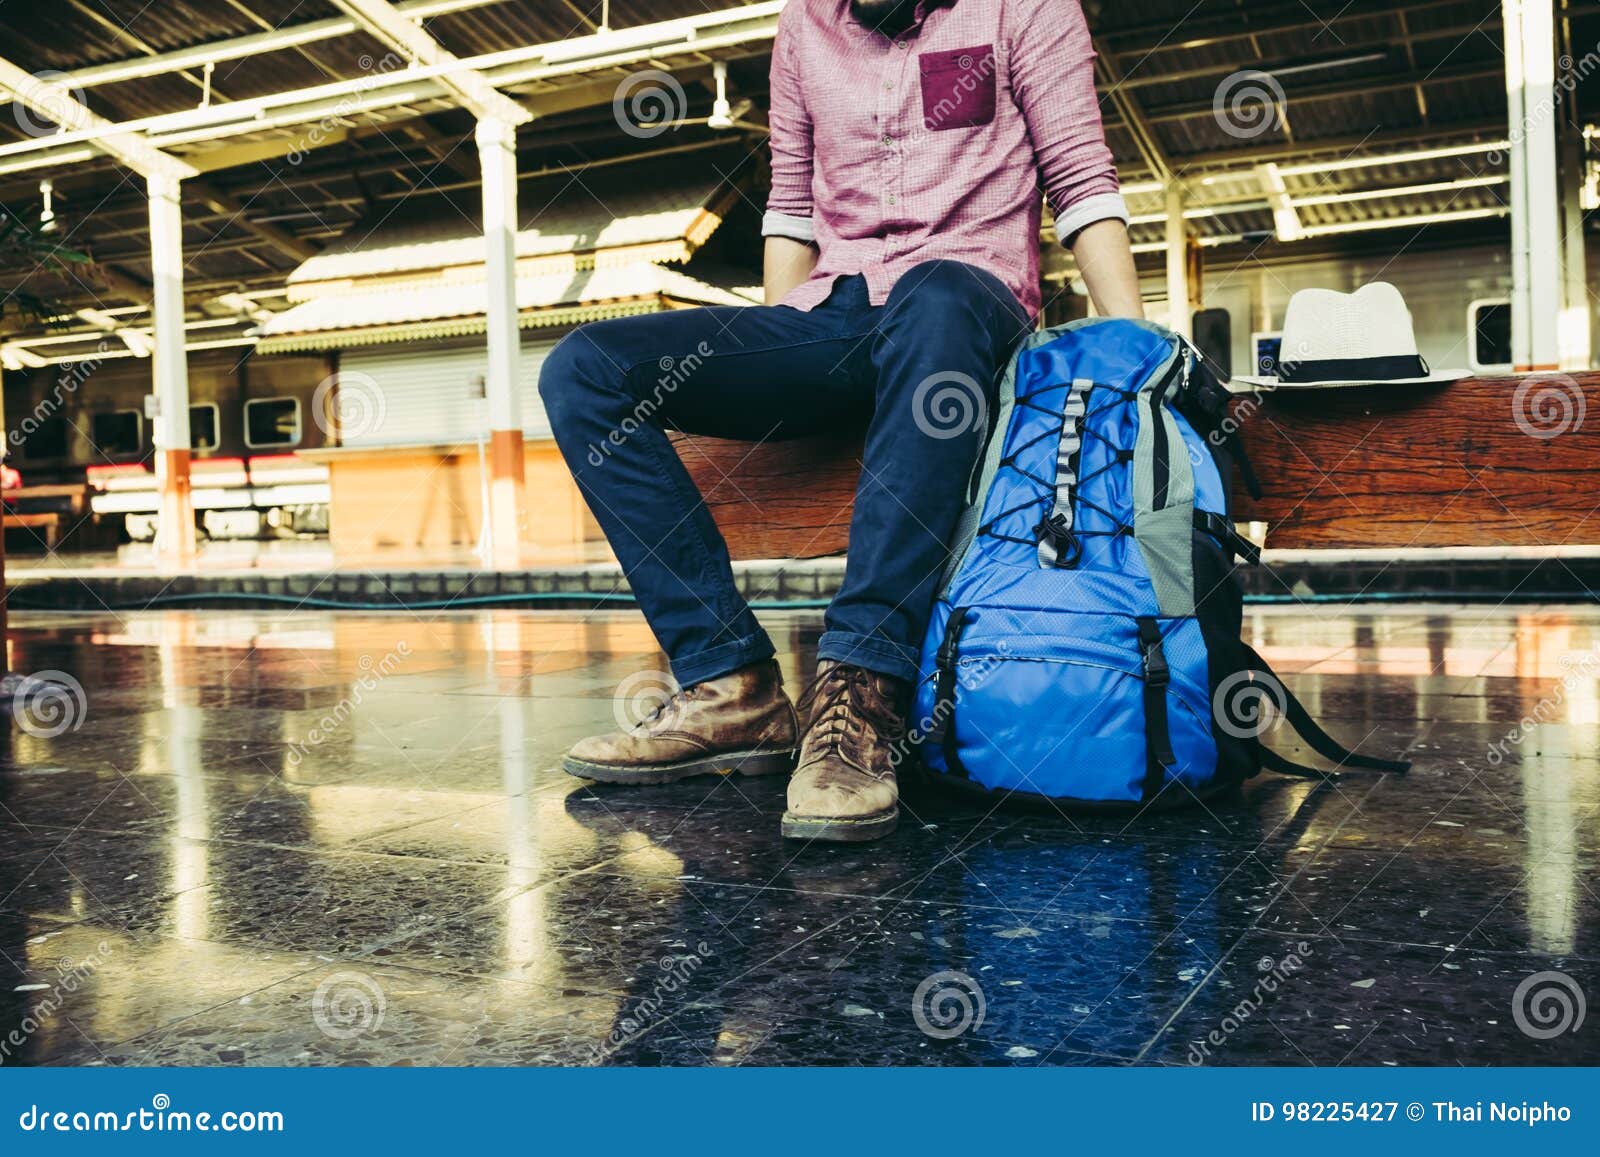 Tourist With Backpack On The Train Station Stock Image Image Of